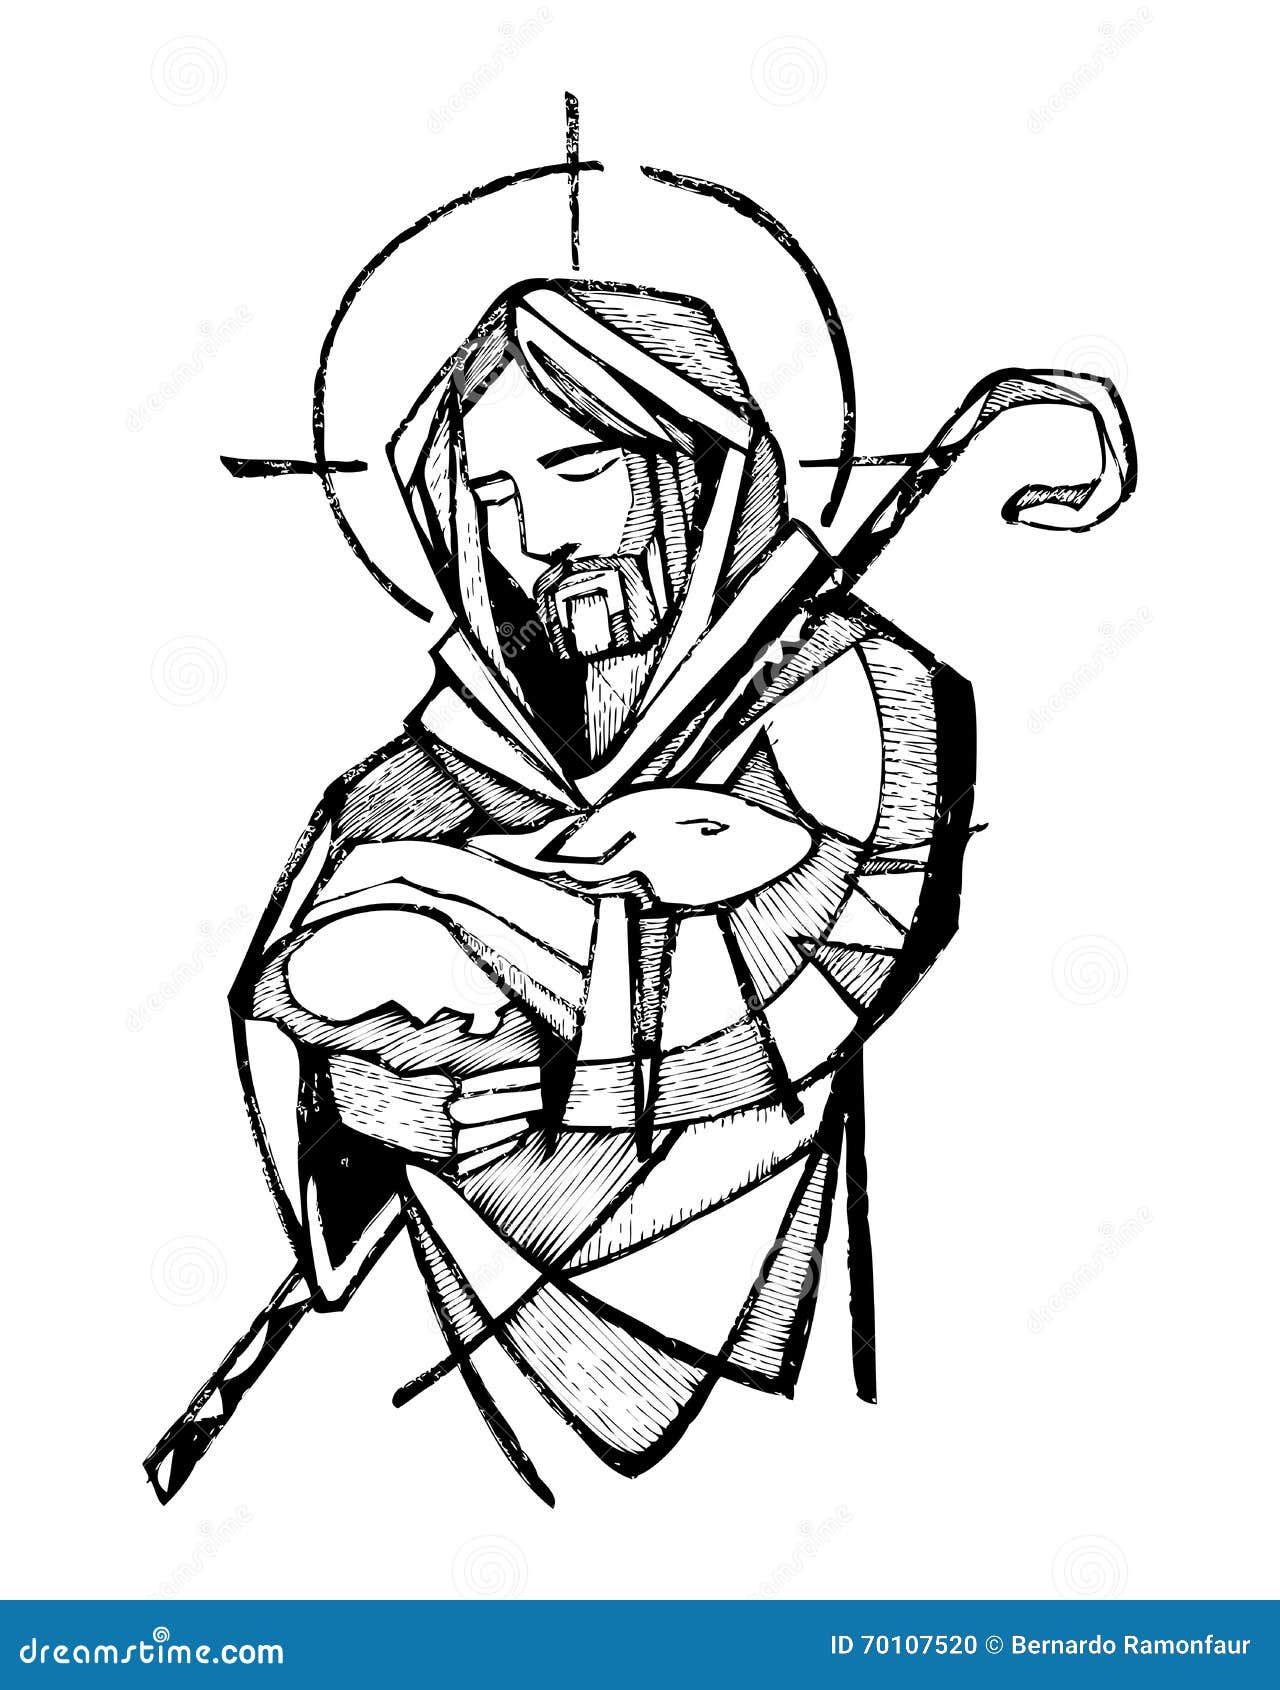 clipart of young jesus - photo #33